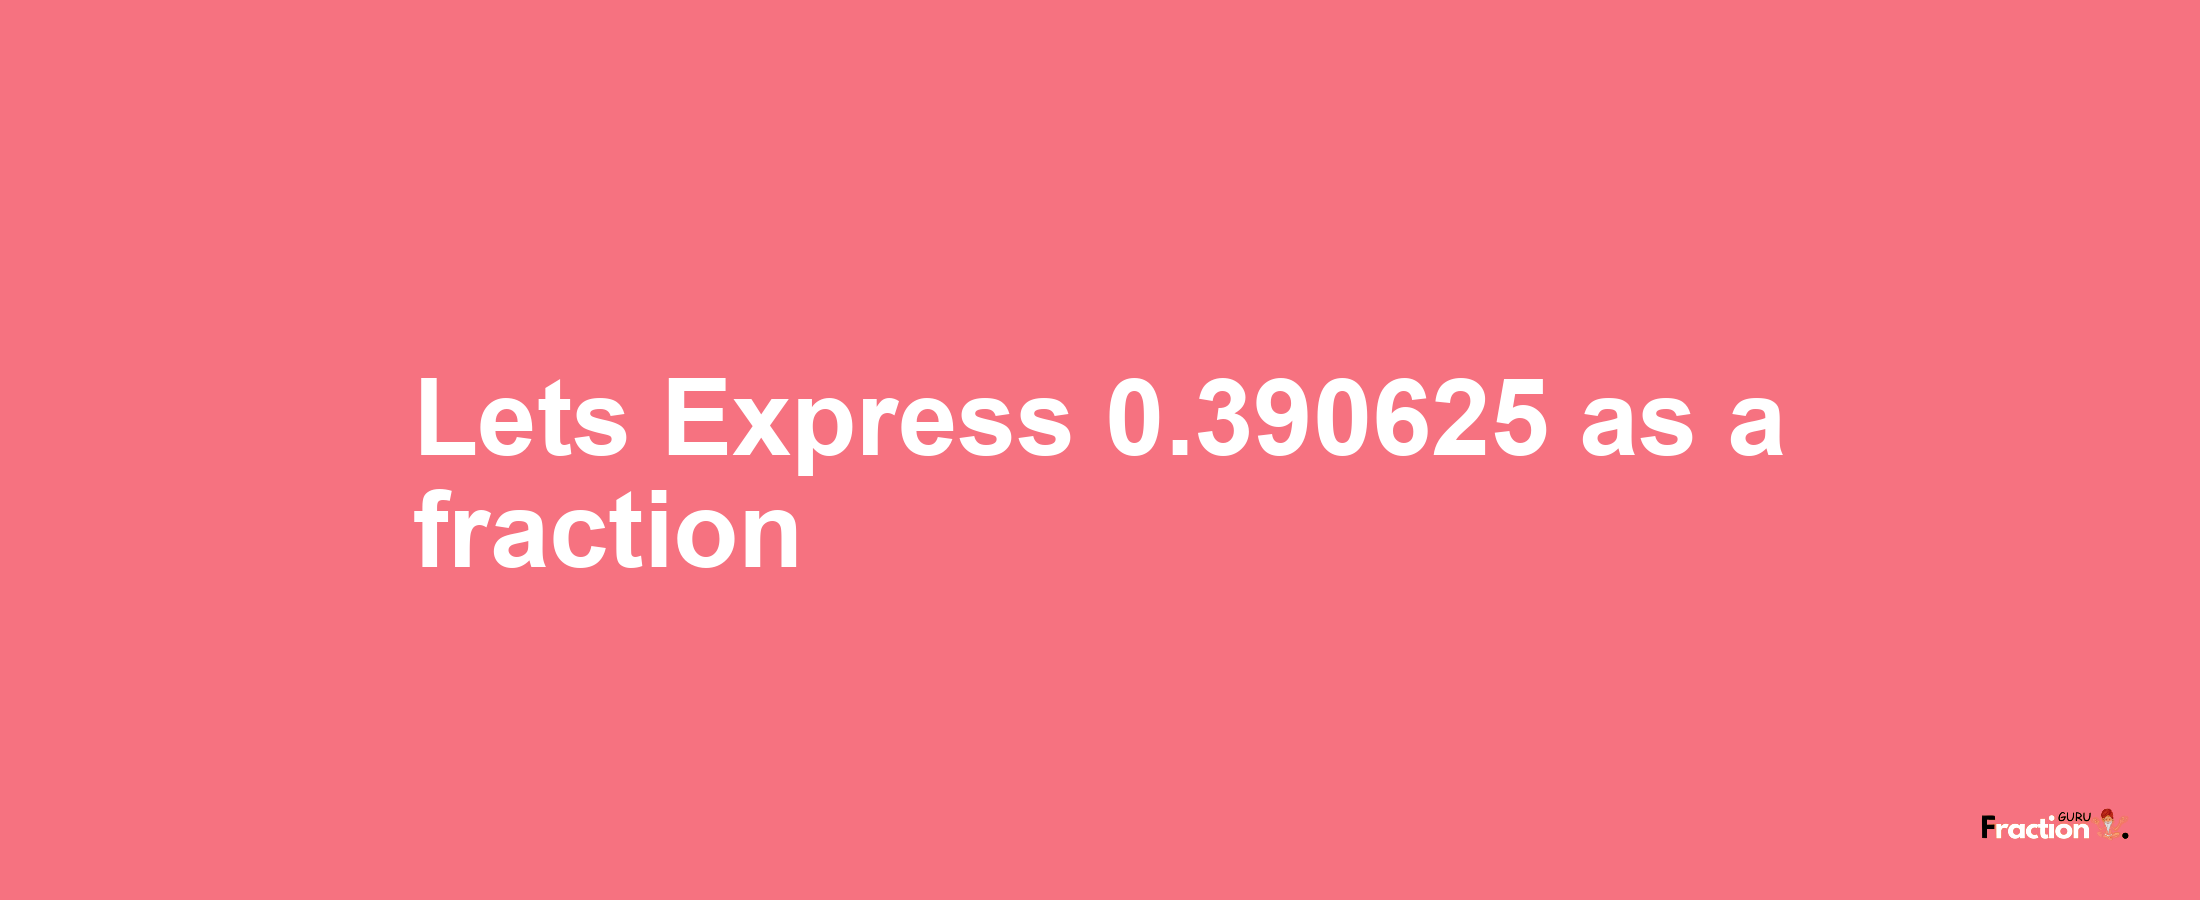 Lets Express 0.390625 as afraction